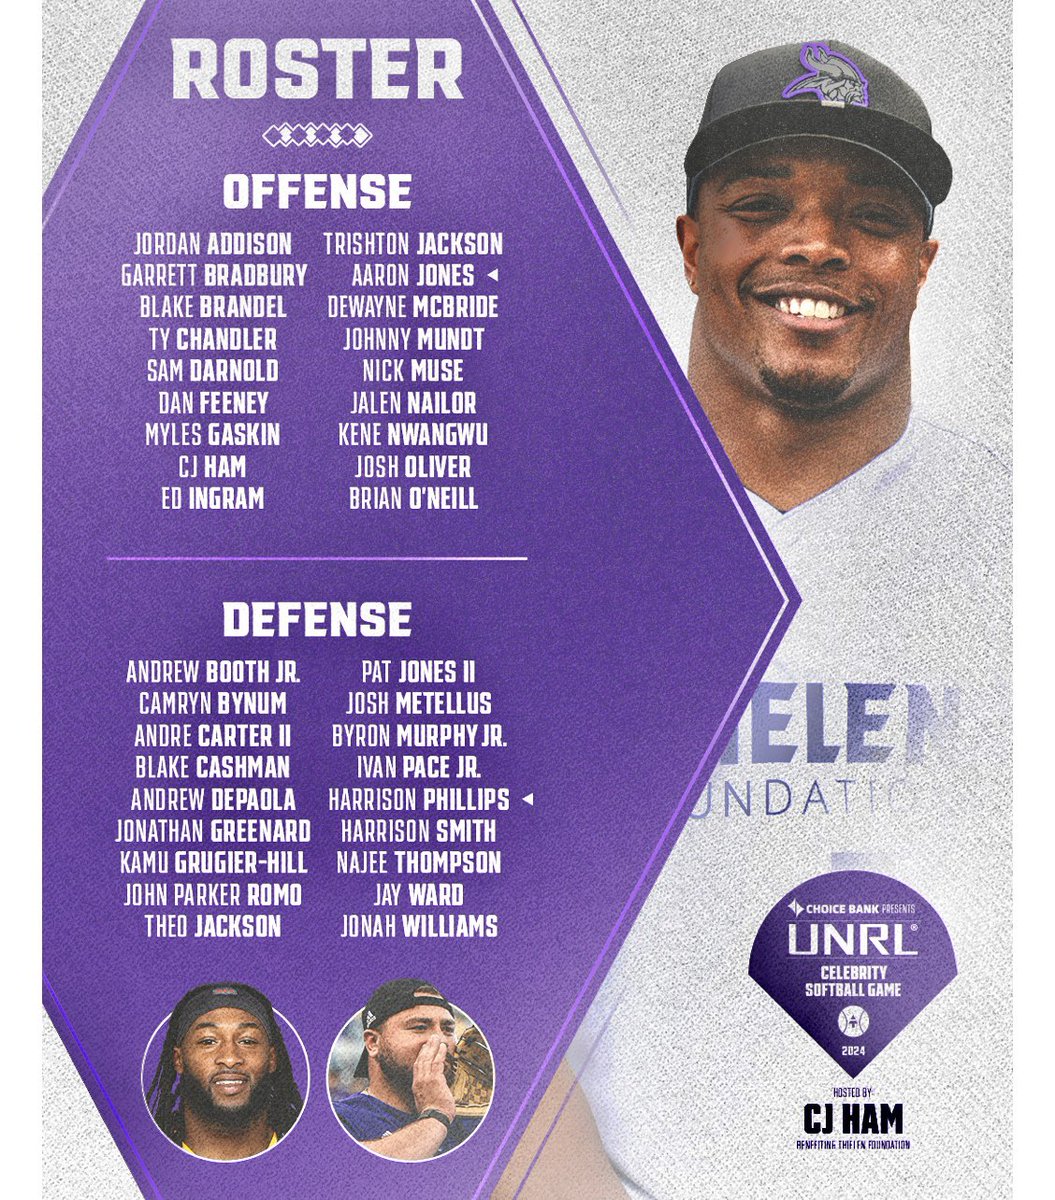 Here are the rosters for the upcoming softball charity event to be held on Thursday May 30th at CHS Field in St. Paul.. the Thielen foundation and host CJ Ham will be presenting the event sponsored by UNRL #Skol